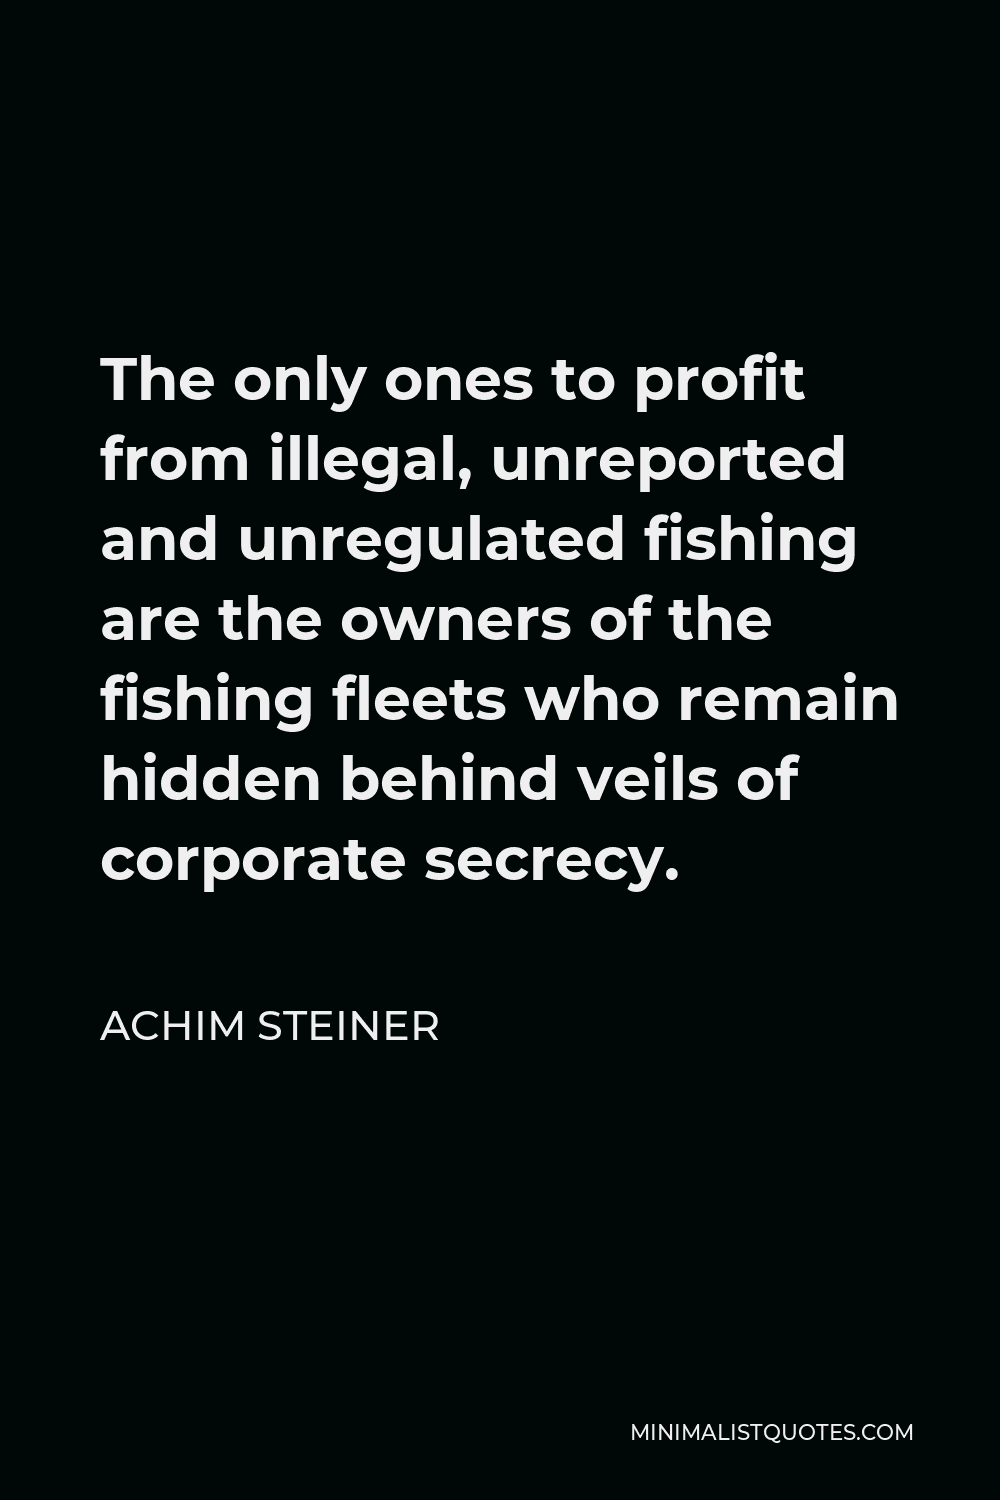 Achim Steiner Quote - The only ones to profit from illegal, unreported and unregulated fishing are the owners of the fishing fleets who remain hidden behind veils of corporate secrecy.